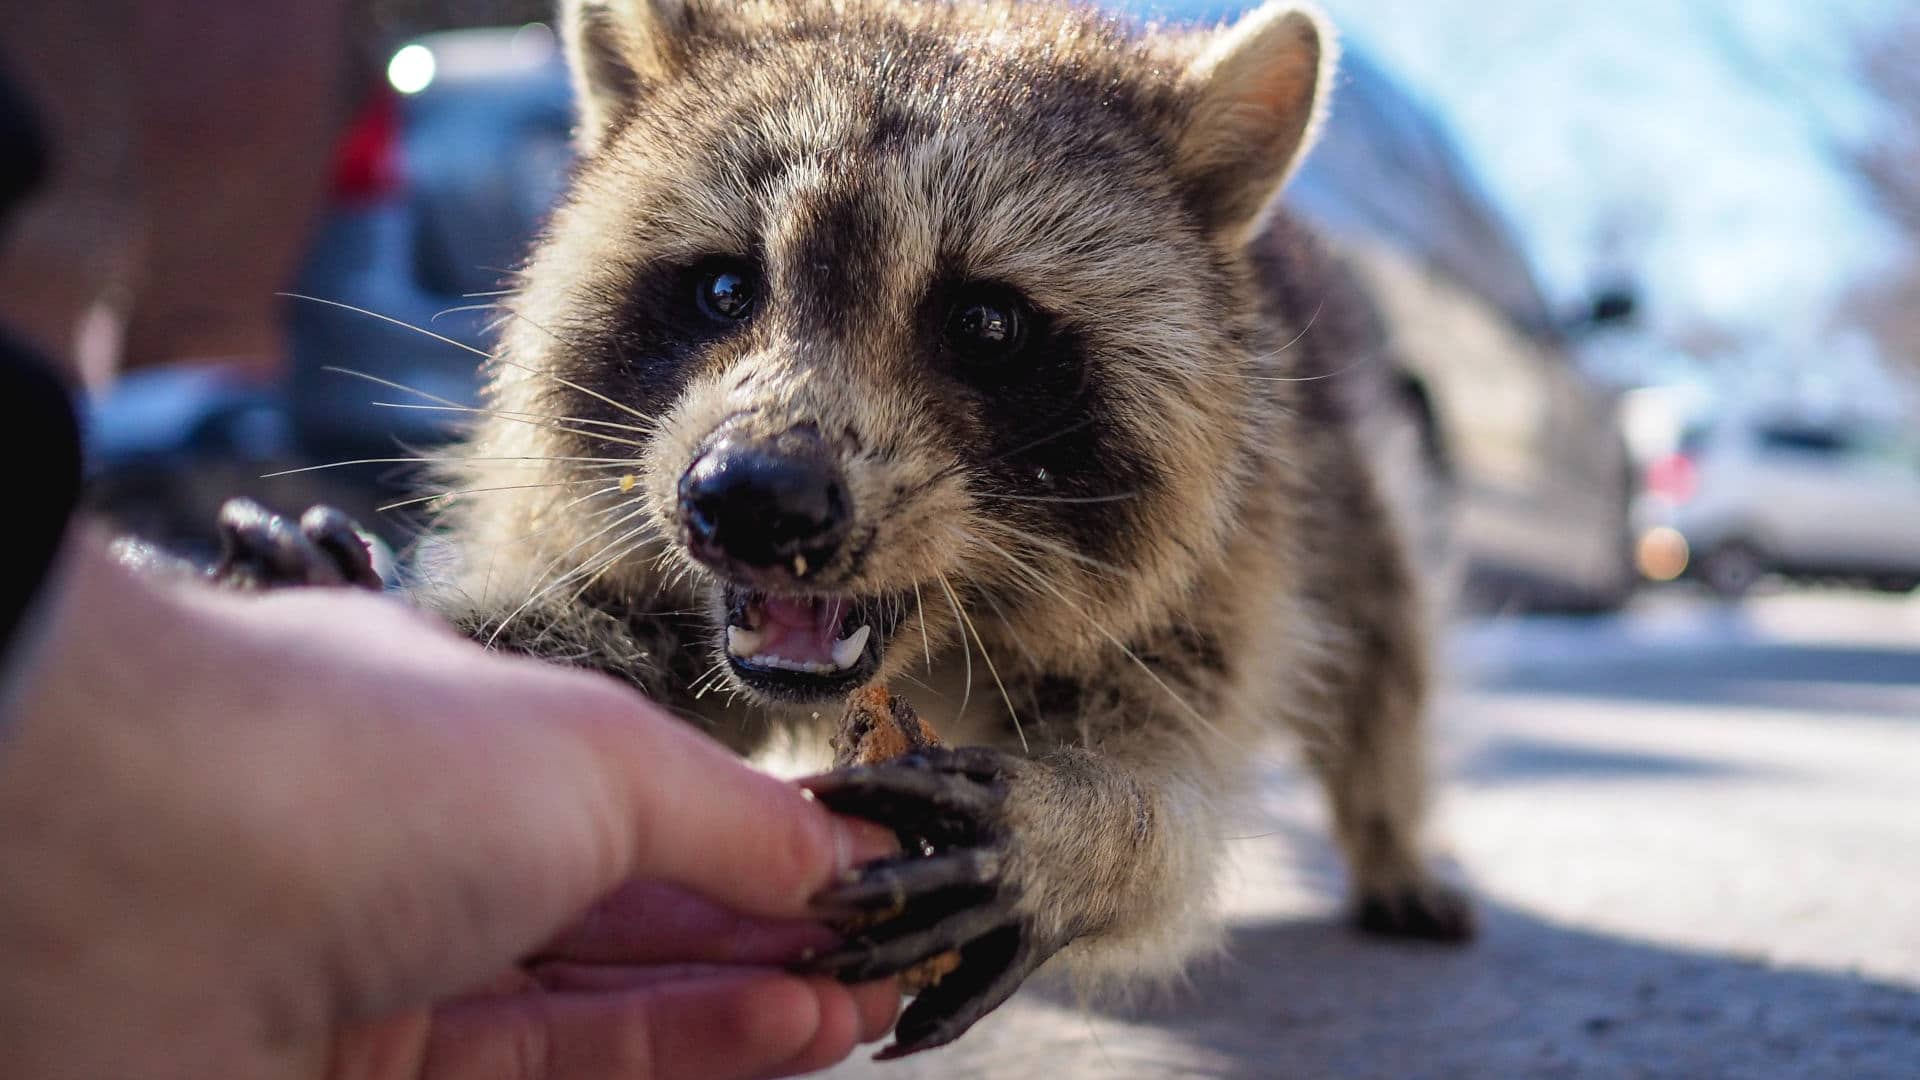 Rabies Is Terrifying but Rare. Are We Overtreating It?